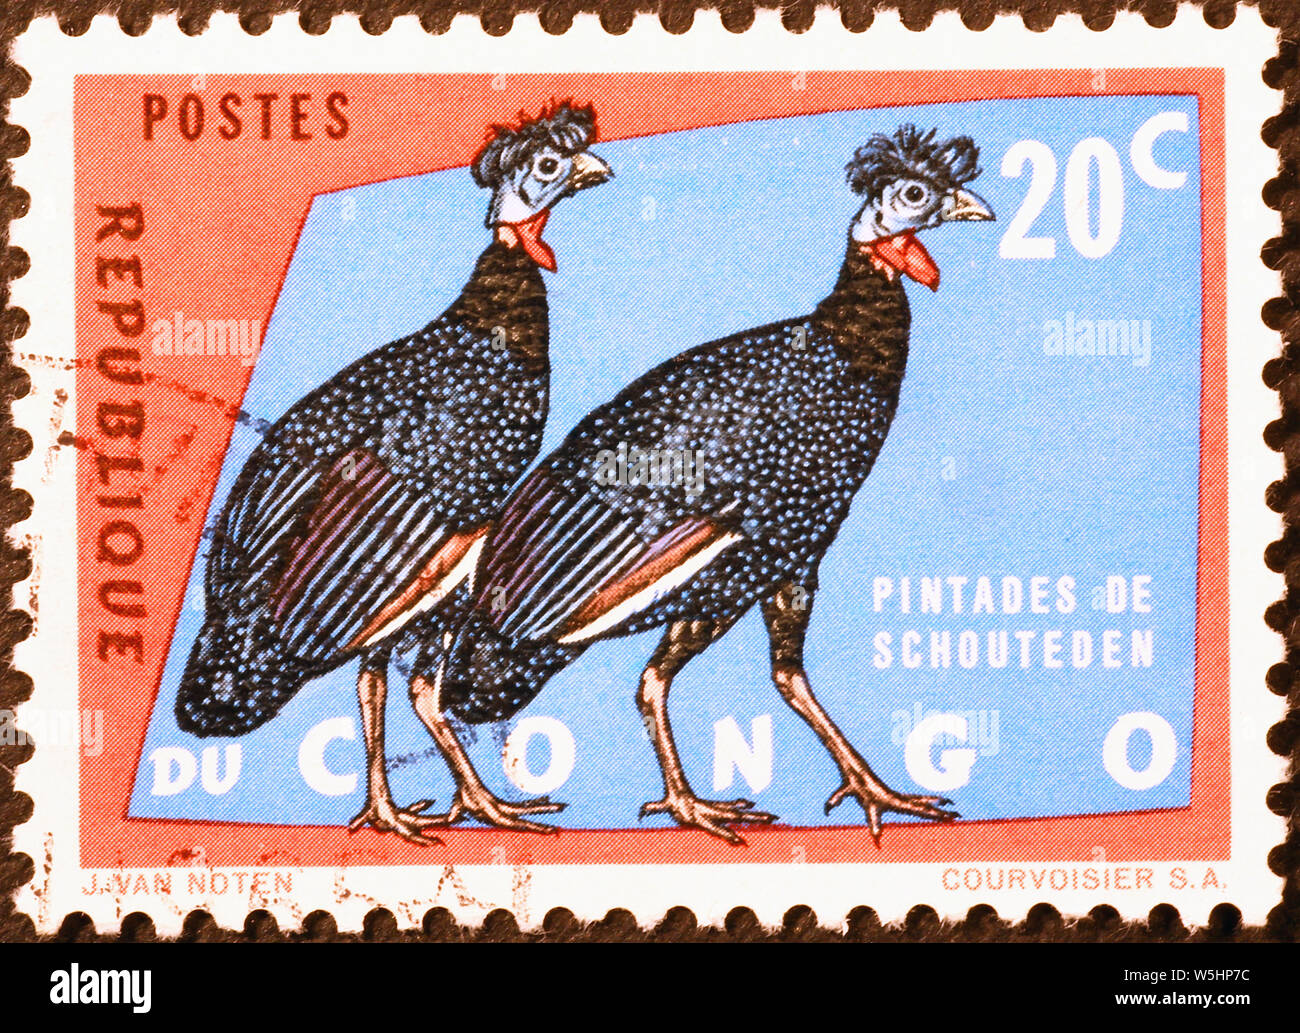 Two crested guineafowls on postage stampo of Congo Stock Photo